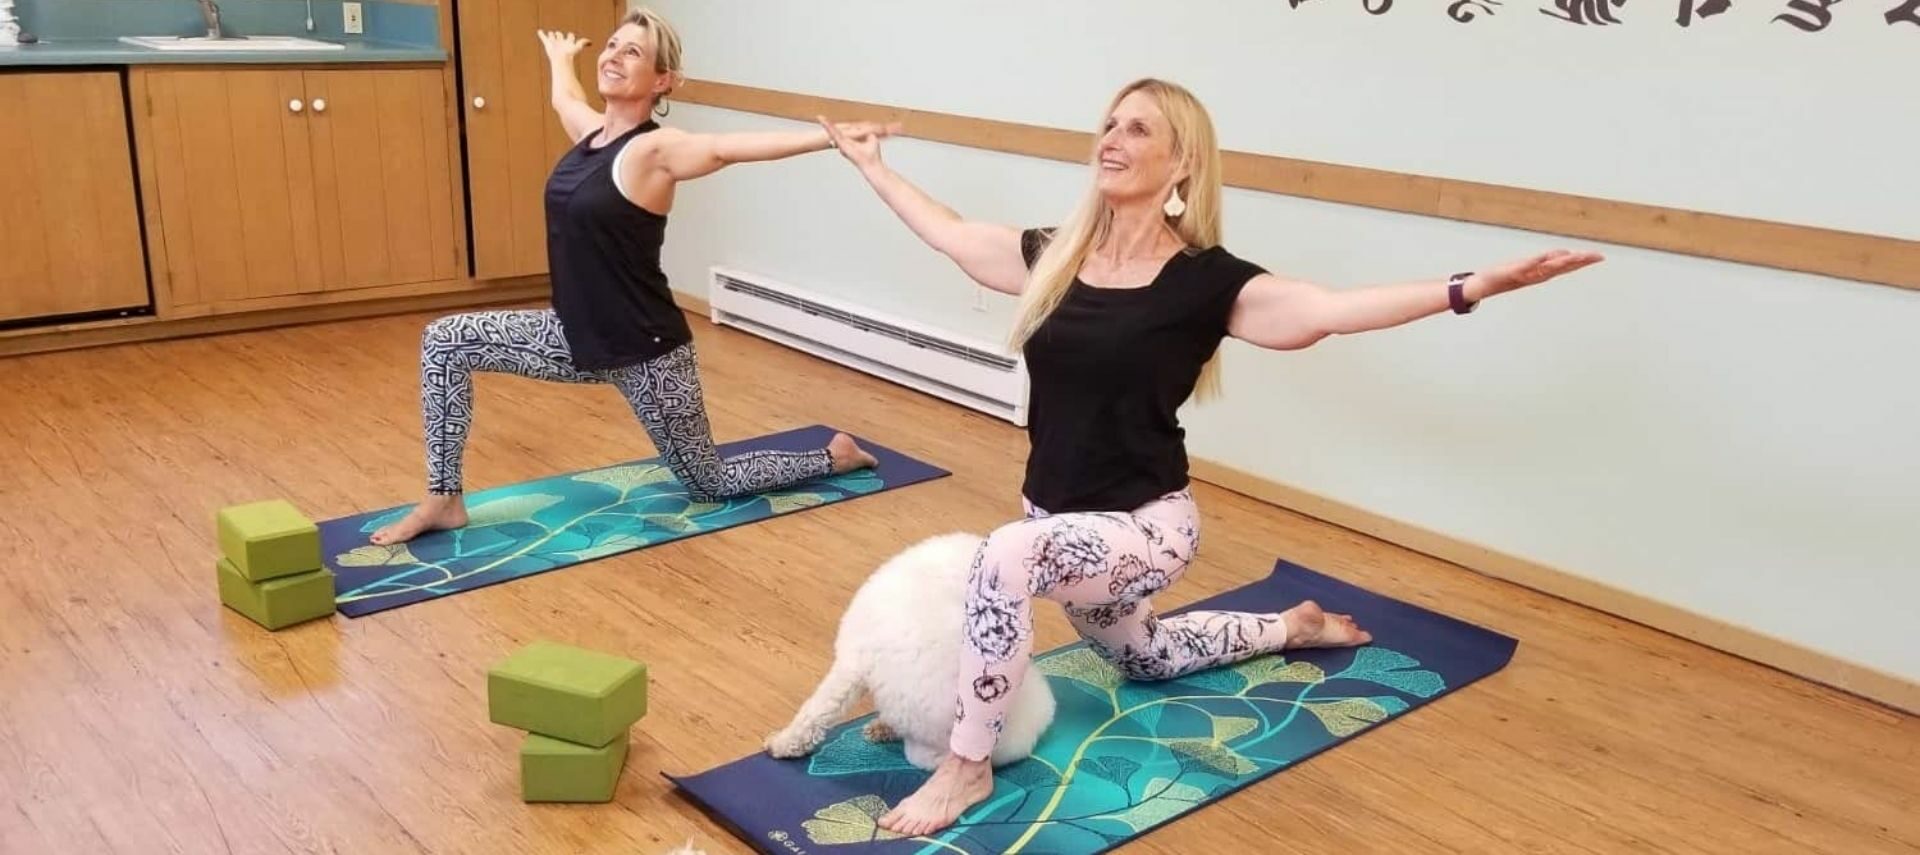 Two ladies in a yoga studio doing yoga poses on multicolored yoga mats with two white fluffy dogs nearby